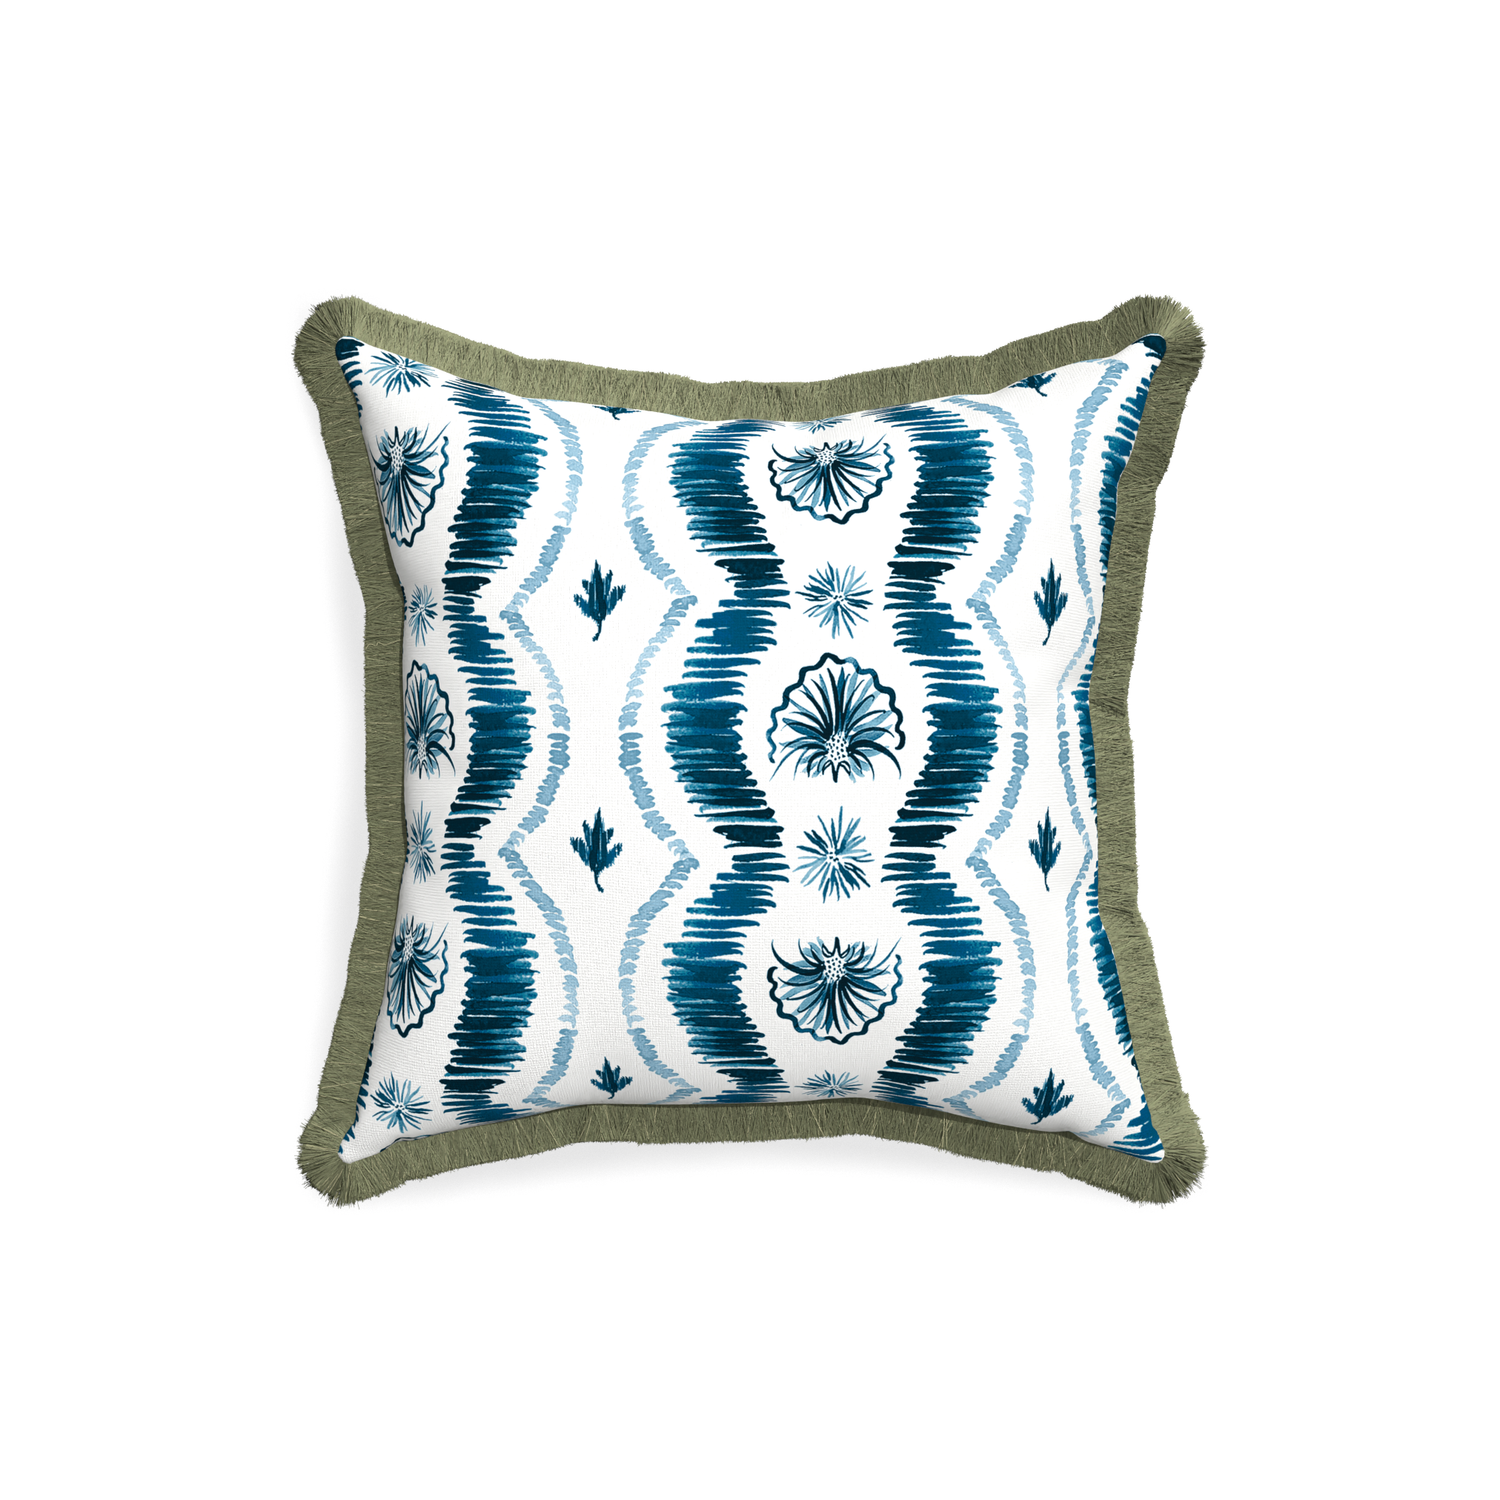 Square Blue Ikat Stripe Pillow with green fringe